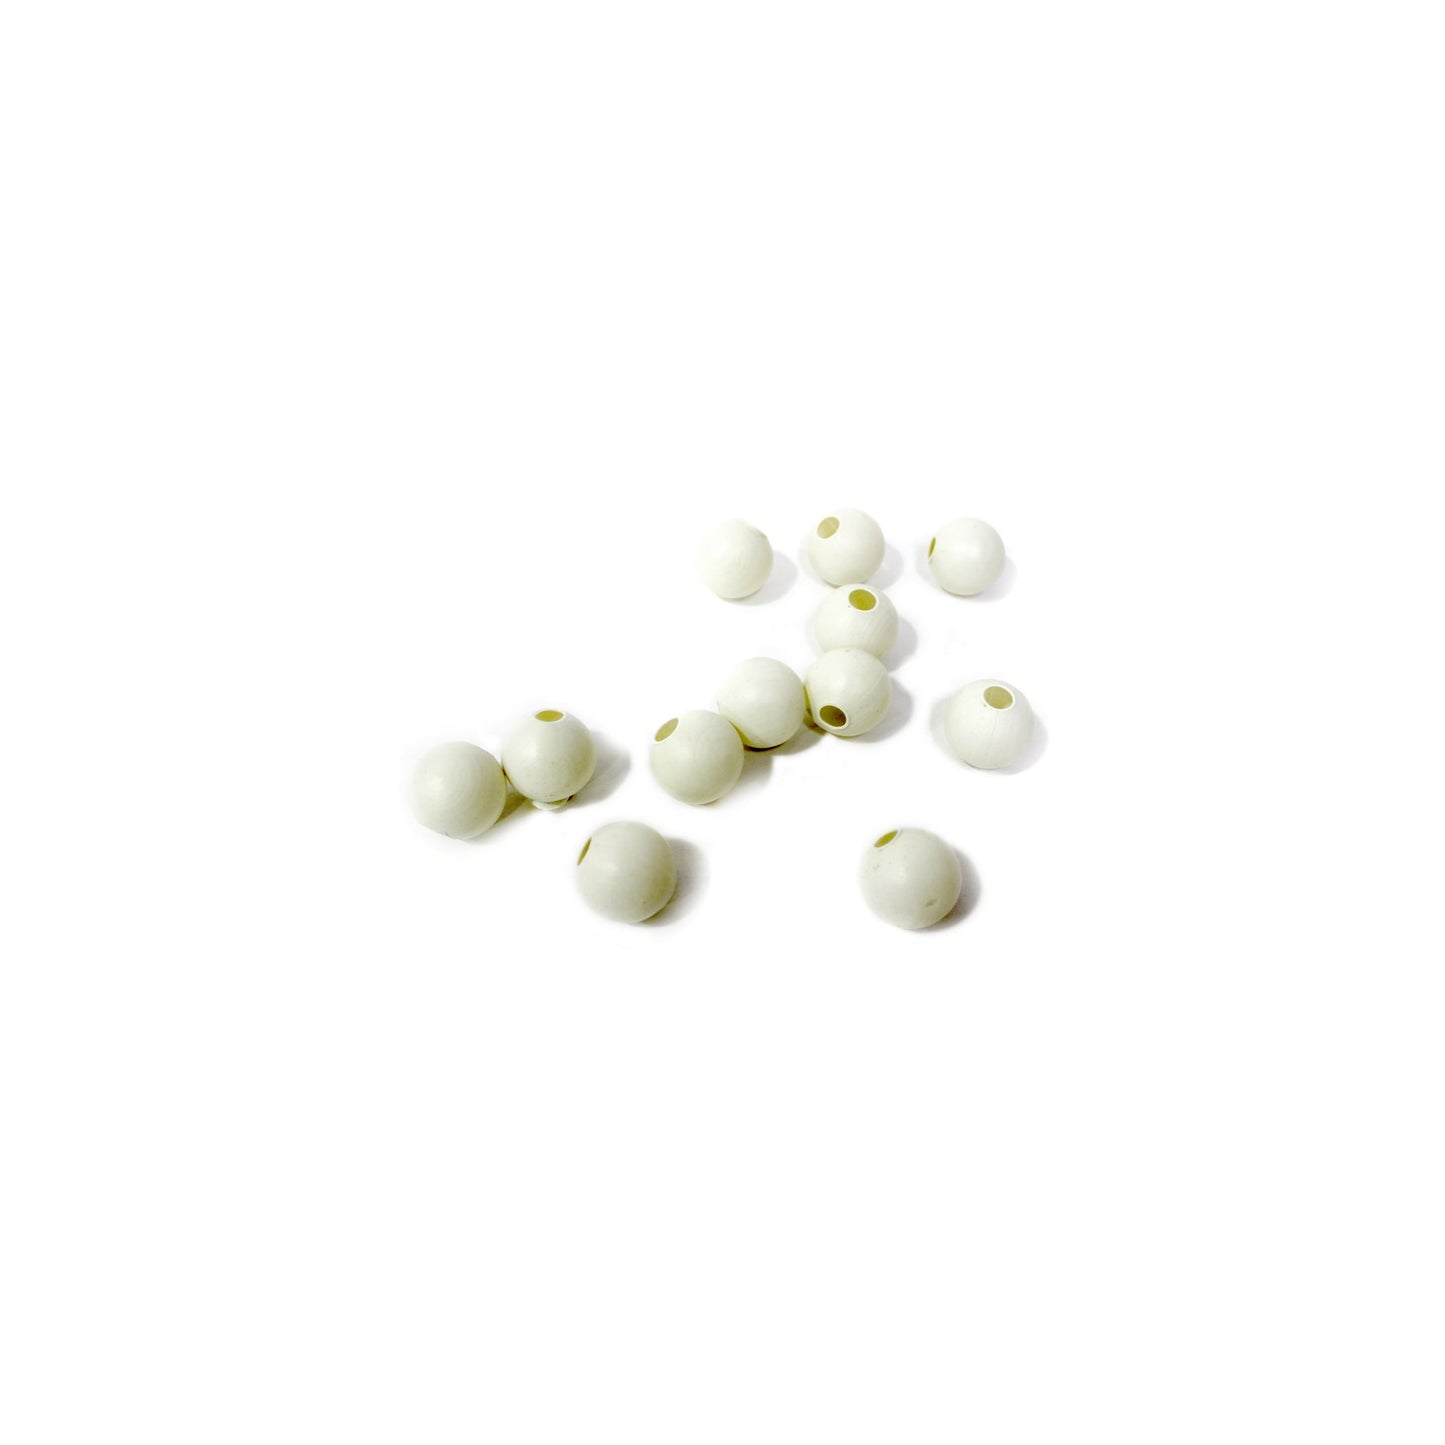 Indian Petals Ultra Lightweight Hollow Plastic Ball Motif for Jewelry Craft or Decoration, Ivory, Medium